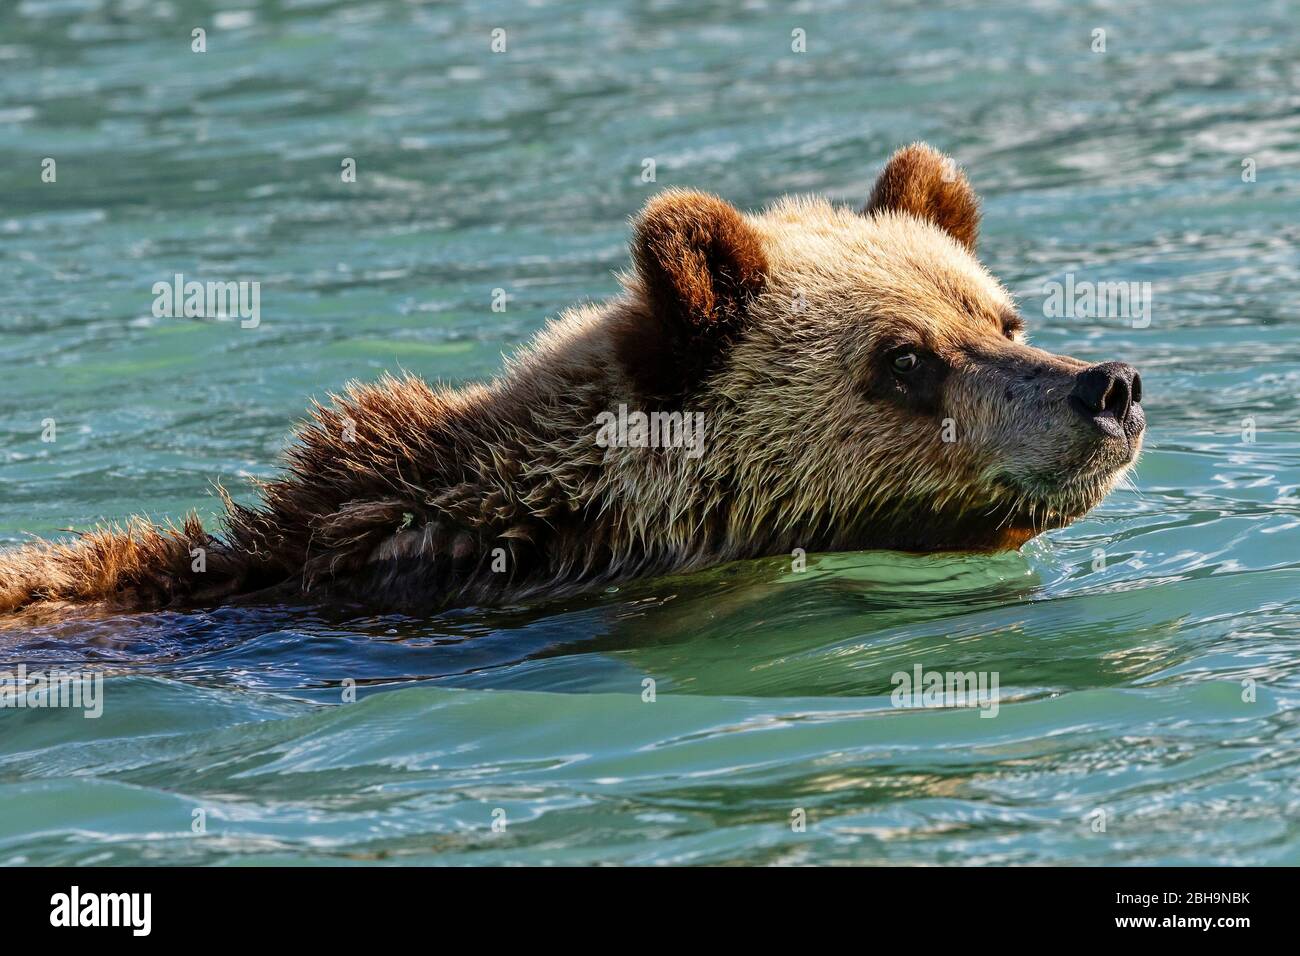 Young grizzly bear is swimming along the shoreline of the Great Bear Rainforest, First Nations area, British Columbia, Canada Stock Photo